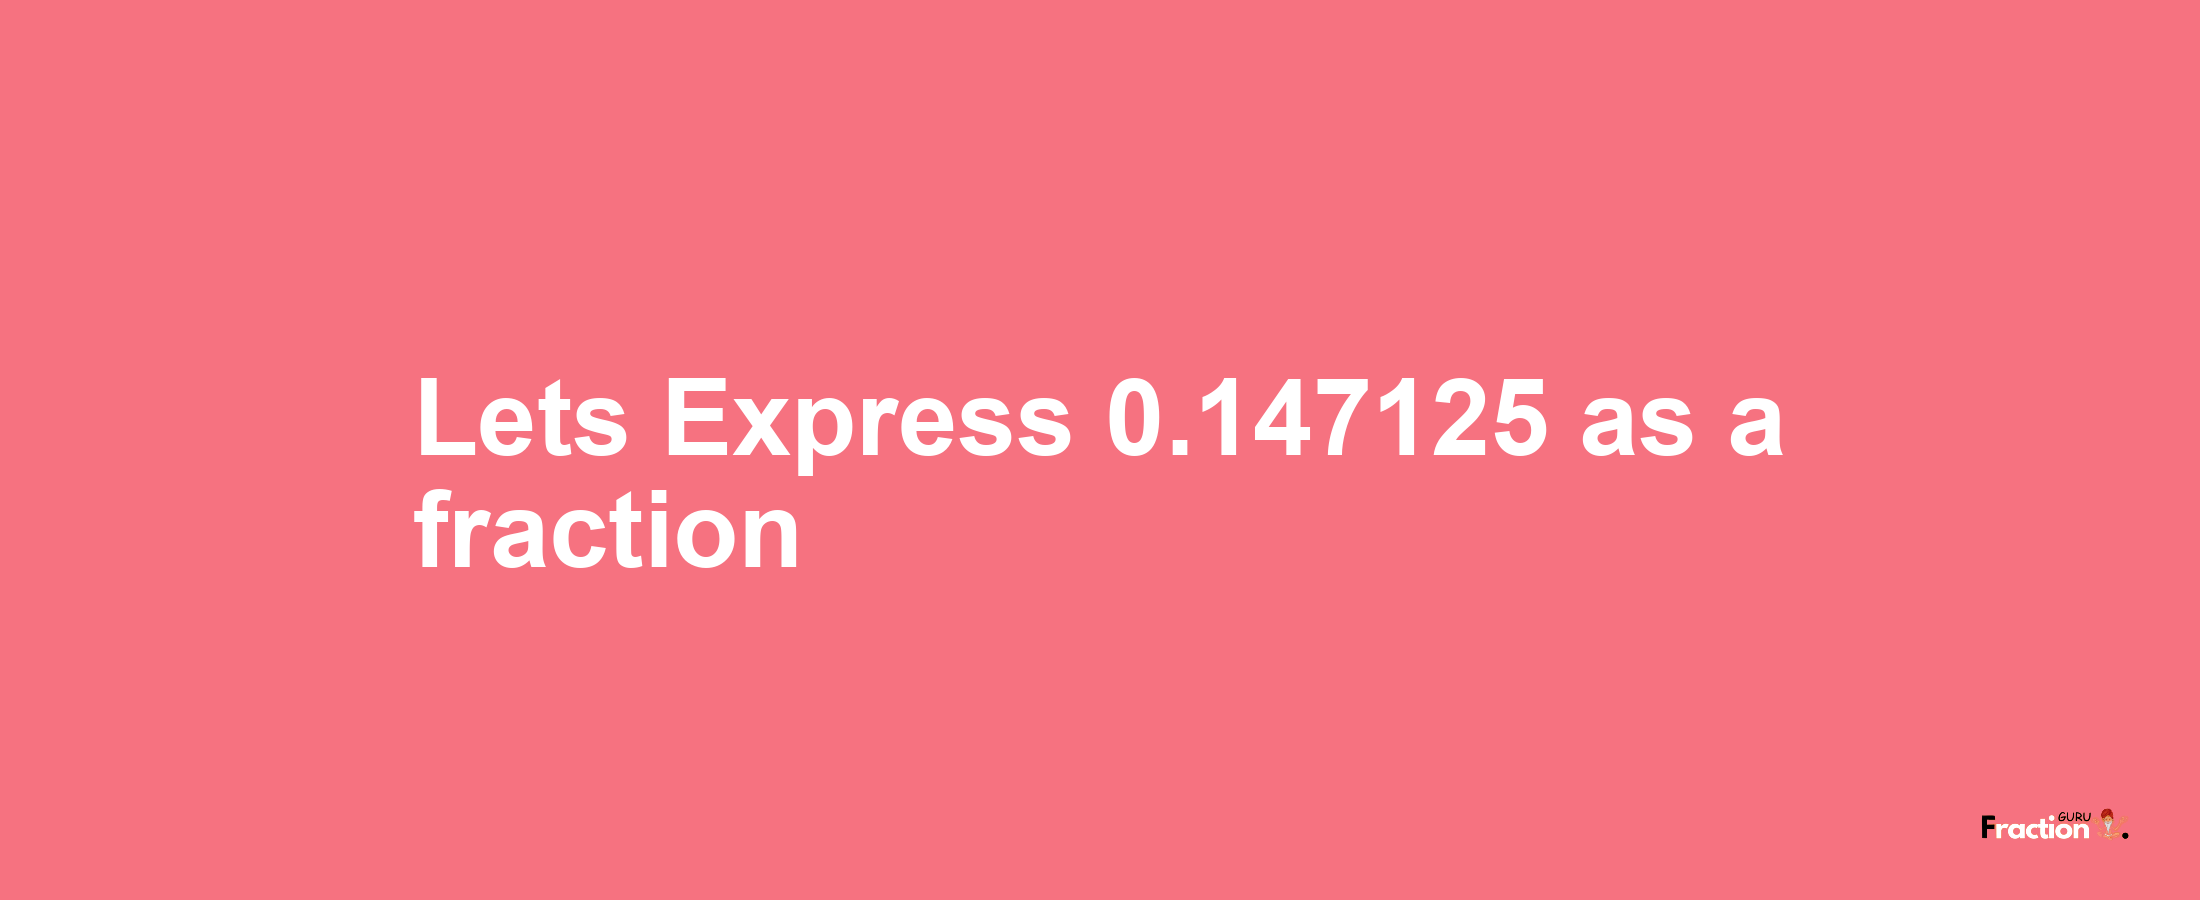 Lets Express 0.147125 as afraction